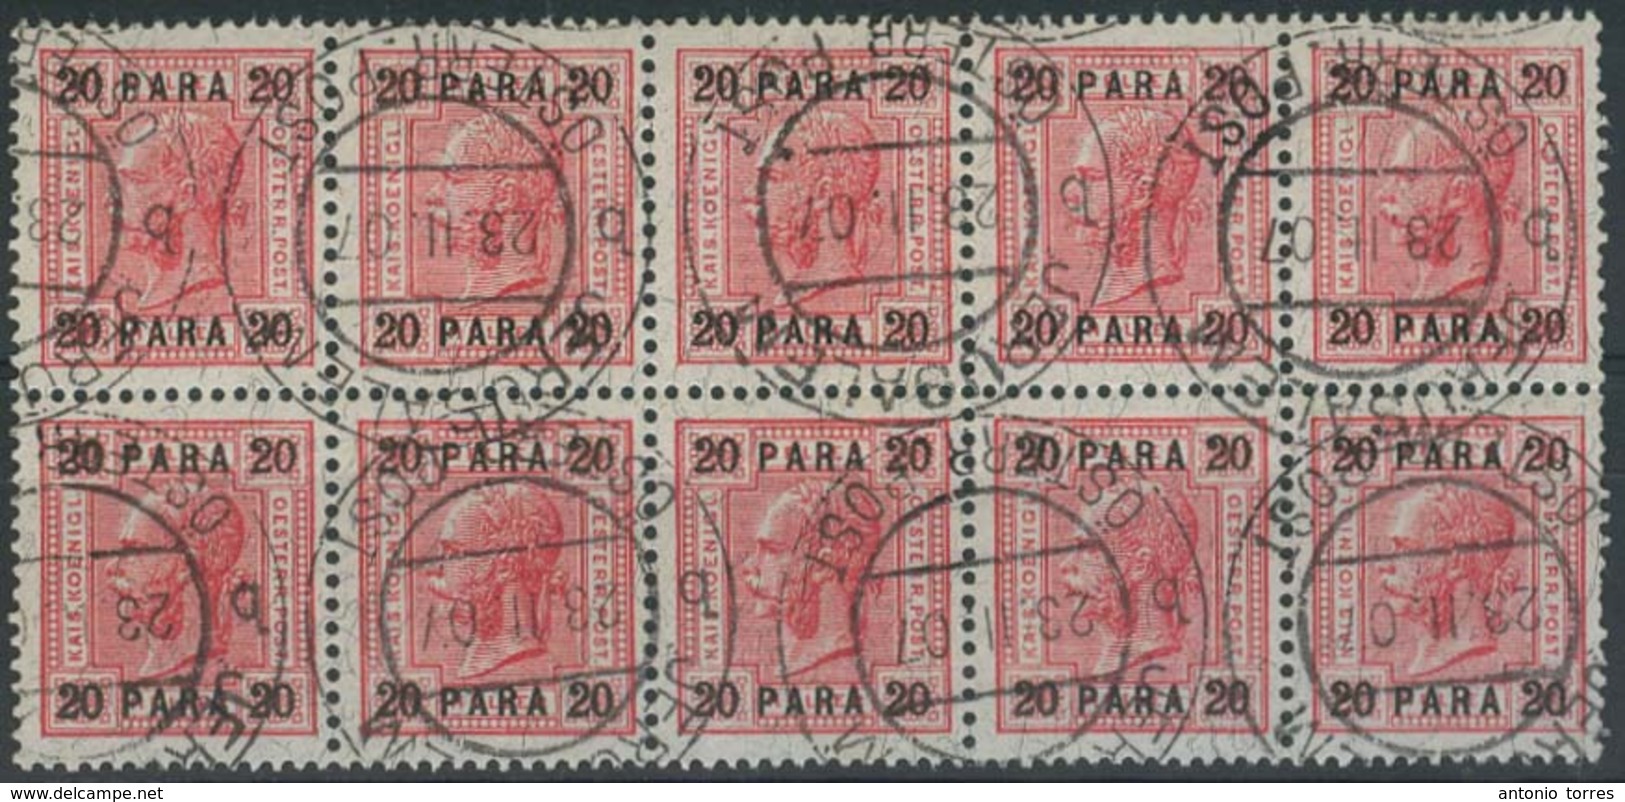 LEBANON. C.1867-1900. Austria PO 12 Stamps / Beyrouth Cancels Diff Types. Some Better Values. Useful Group. - Lebanon